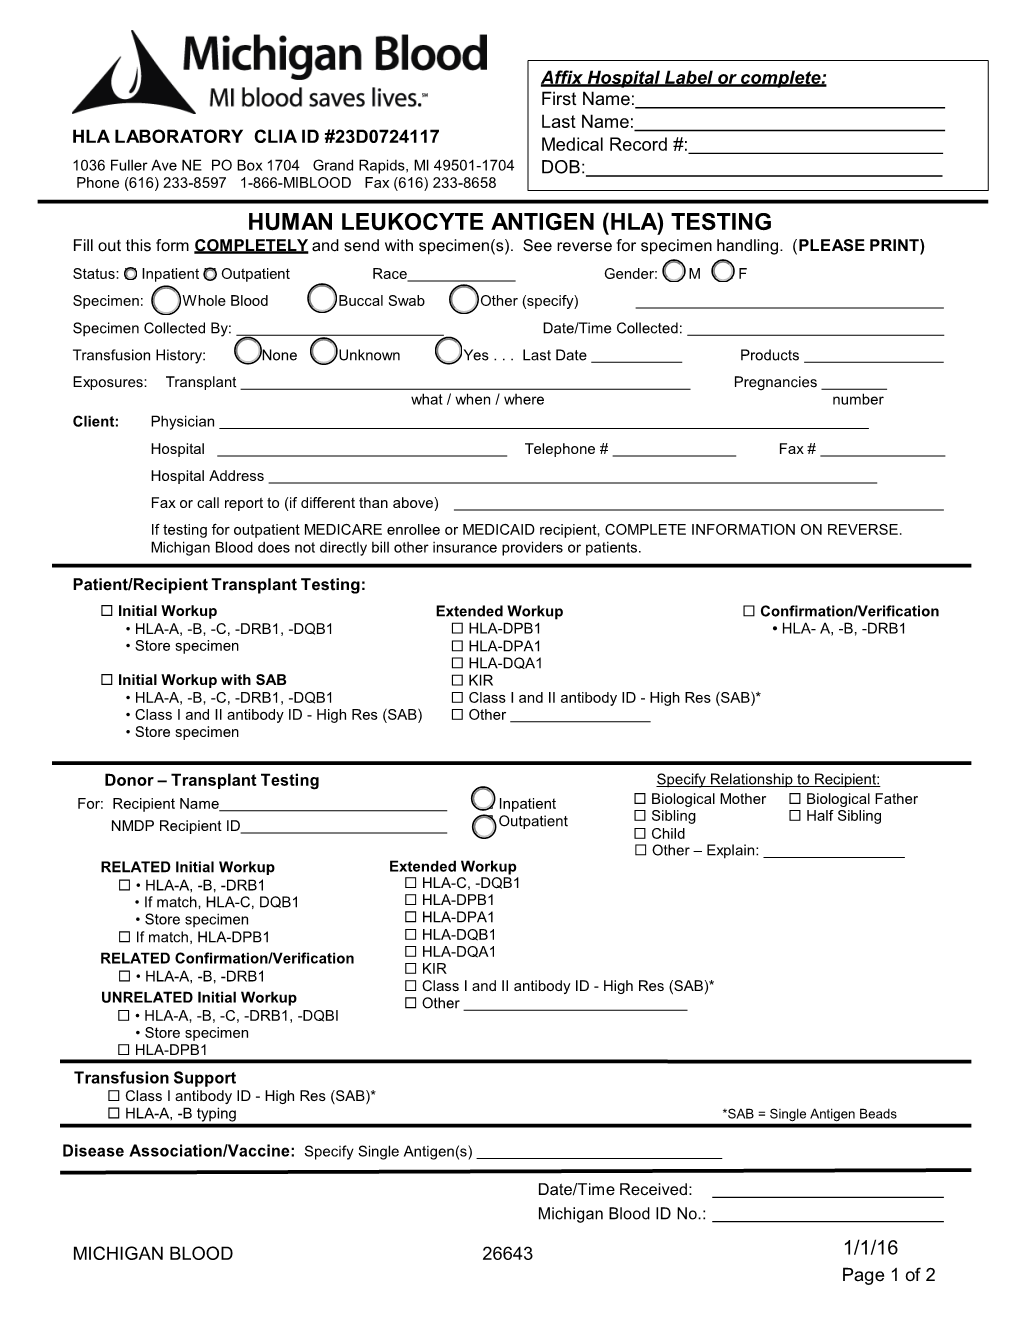 HUMAN LEUKOCYTE ANTIGEN (HLA) TESTING Fill out This Form COMPLETELY and Send with Specimen(S)